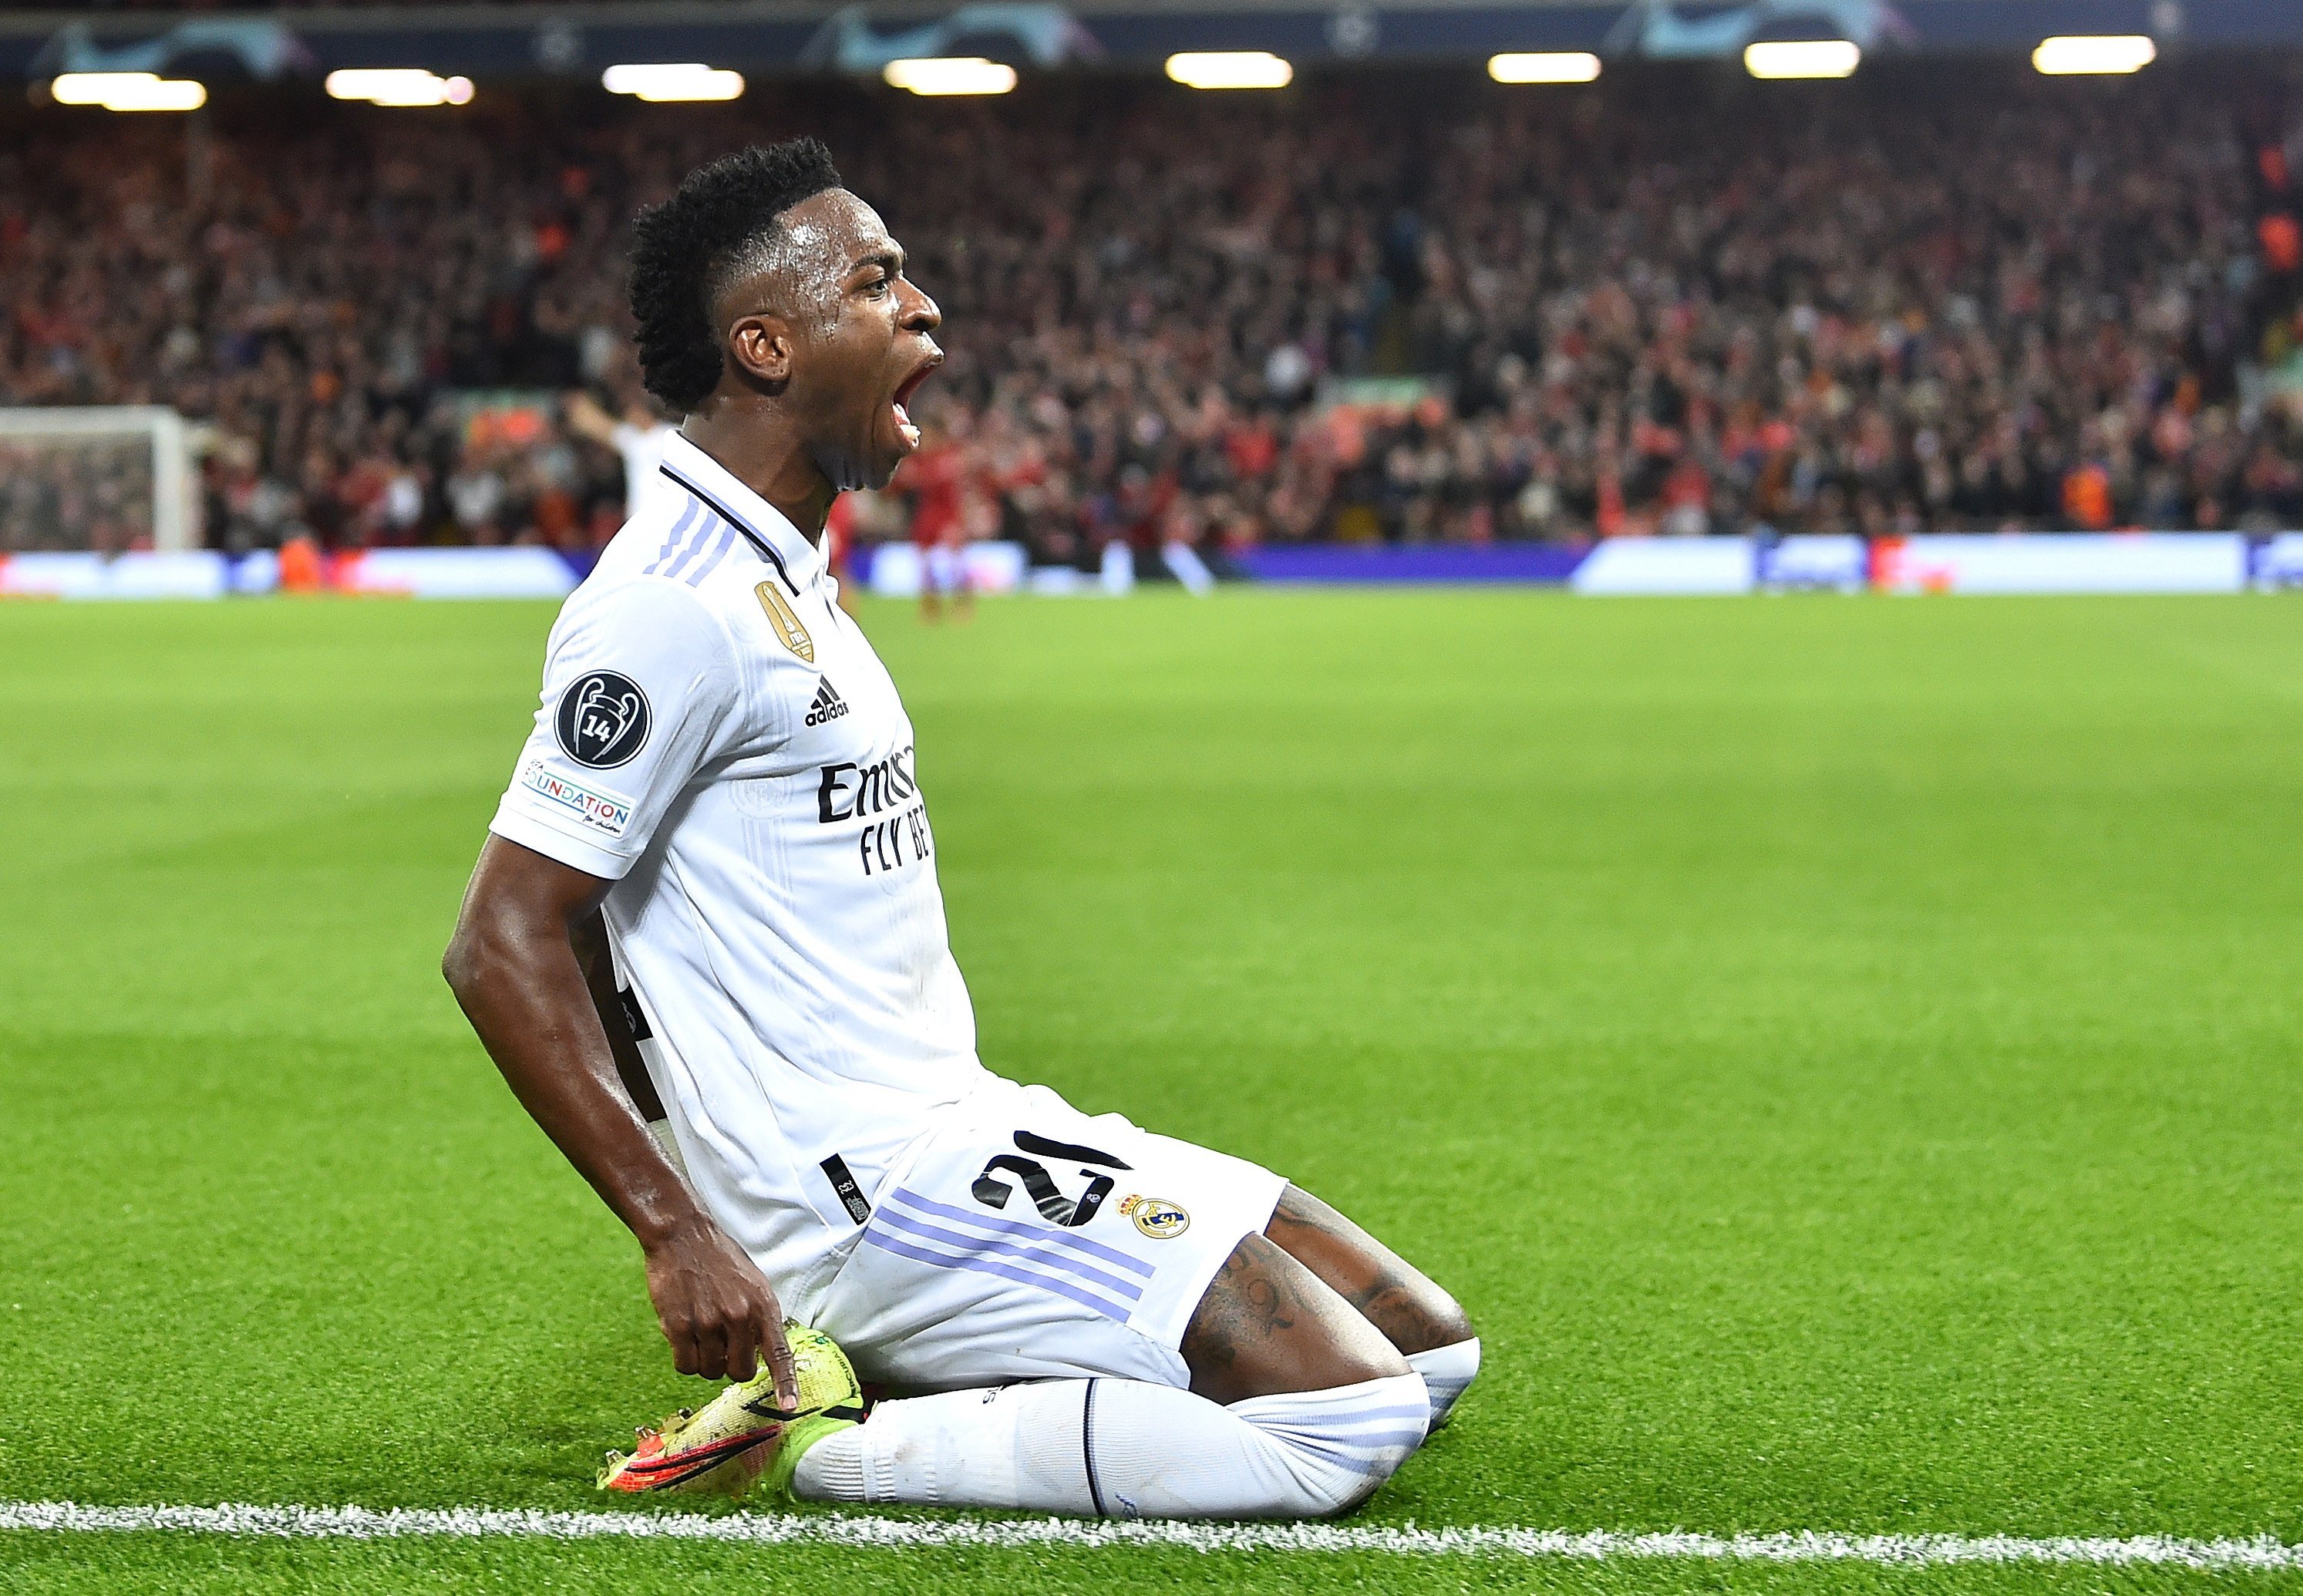 Vinicius Junior of Real Madrid celebrates after scoring his second goal during the Uefa Champions League round of 16 first leg match against Liverpool. Photo: EPA-EFE